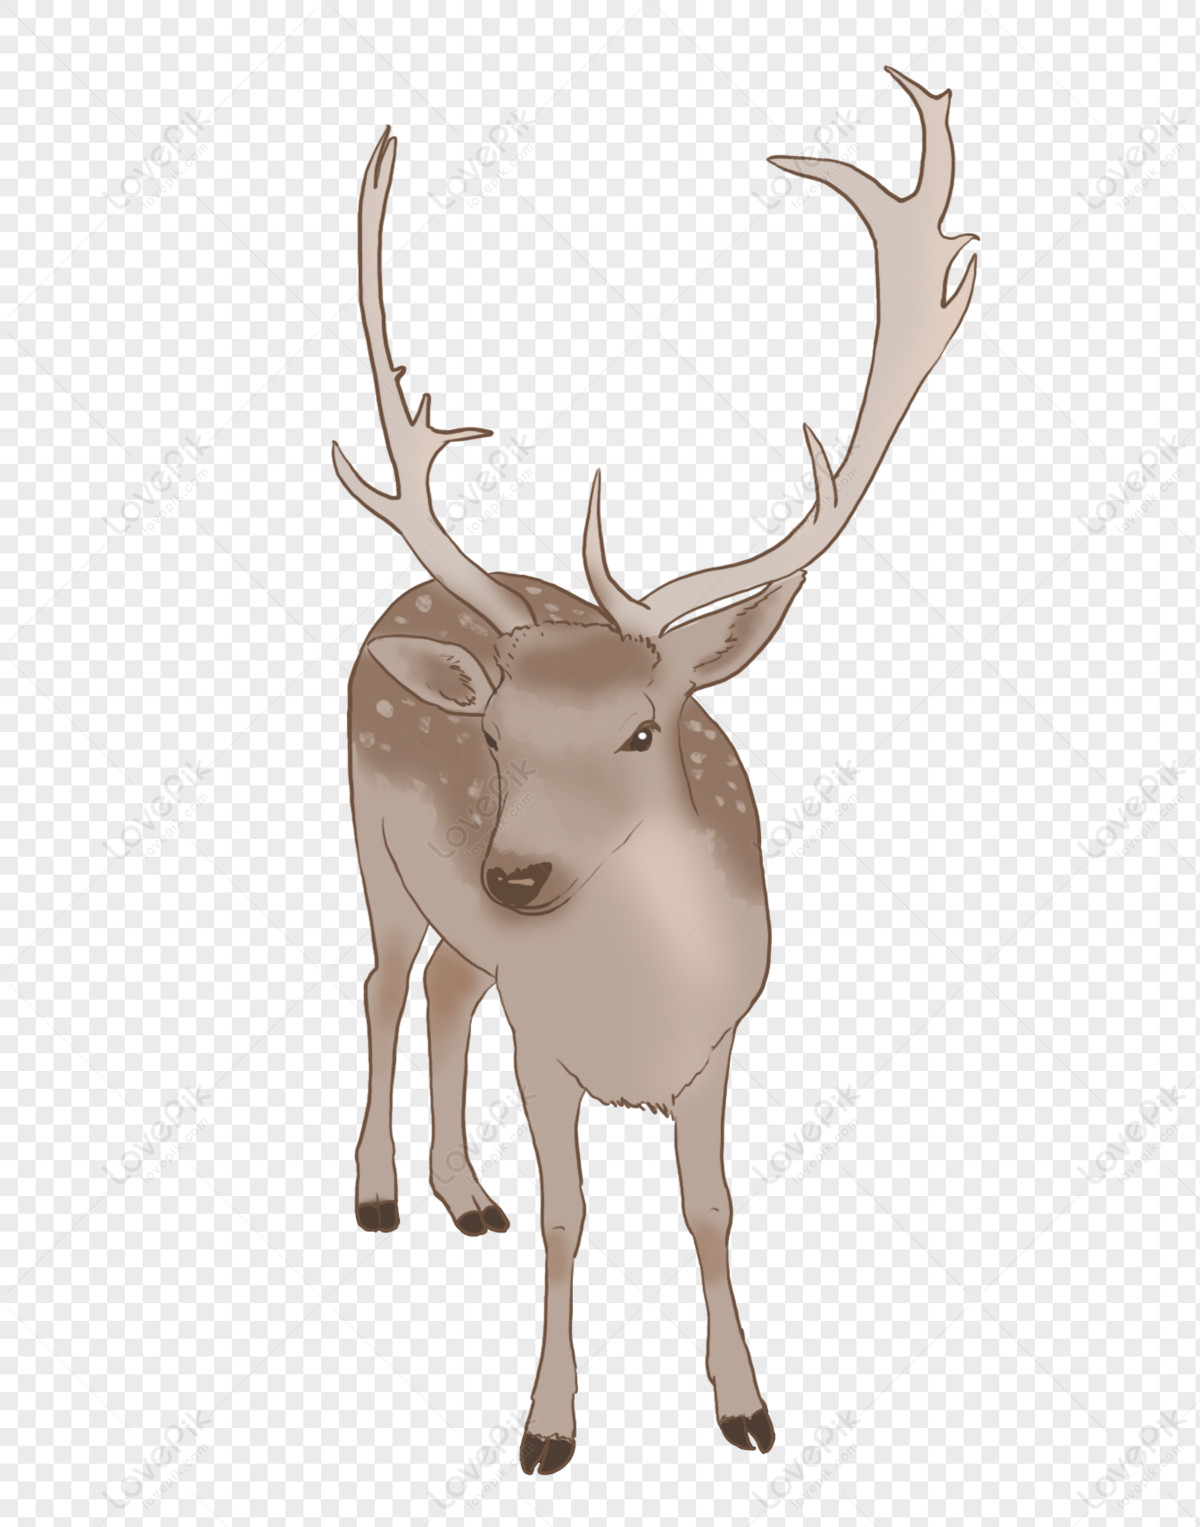 Premium Vector | Cute deer cartoon character with a blue background